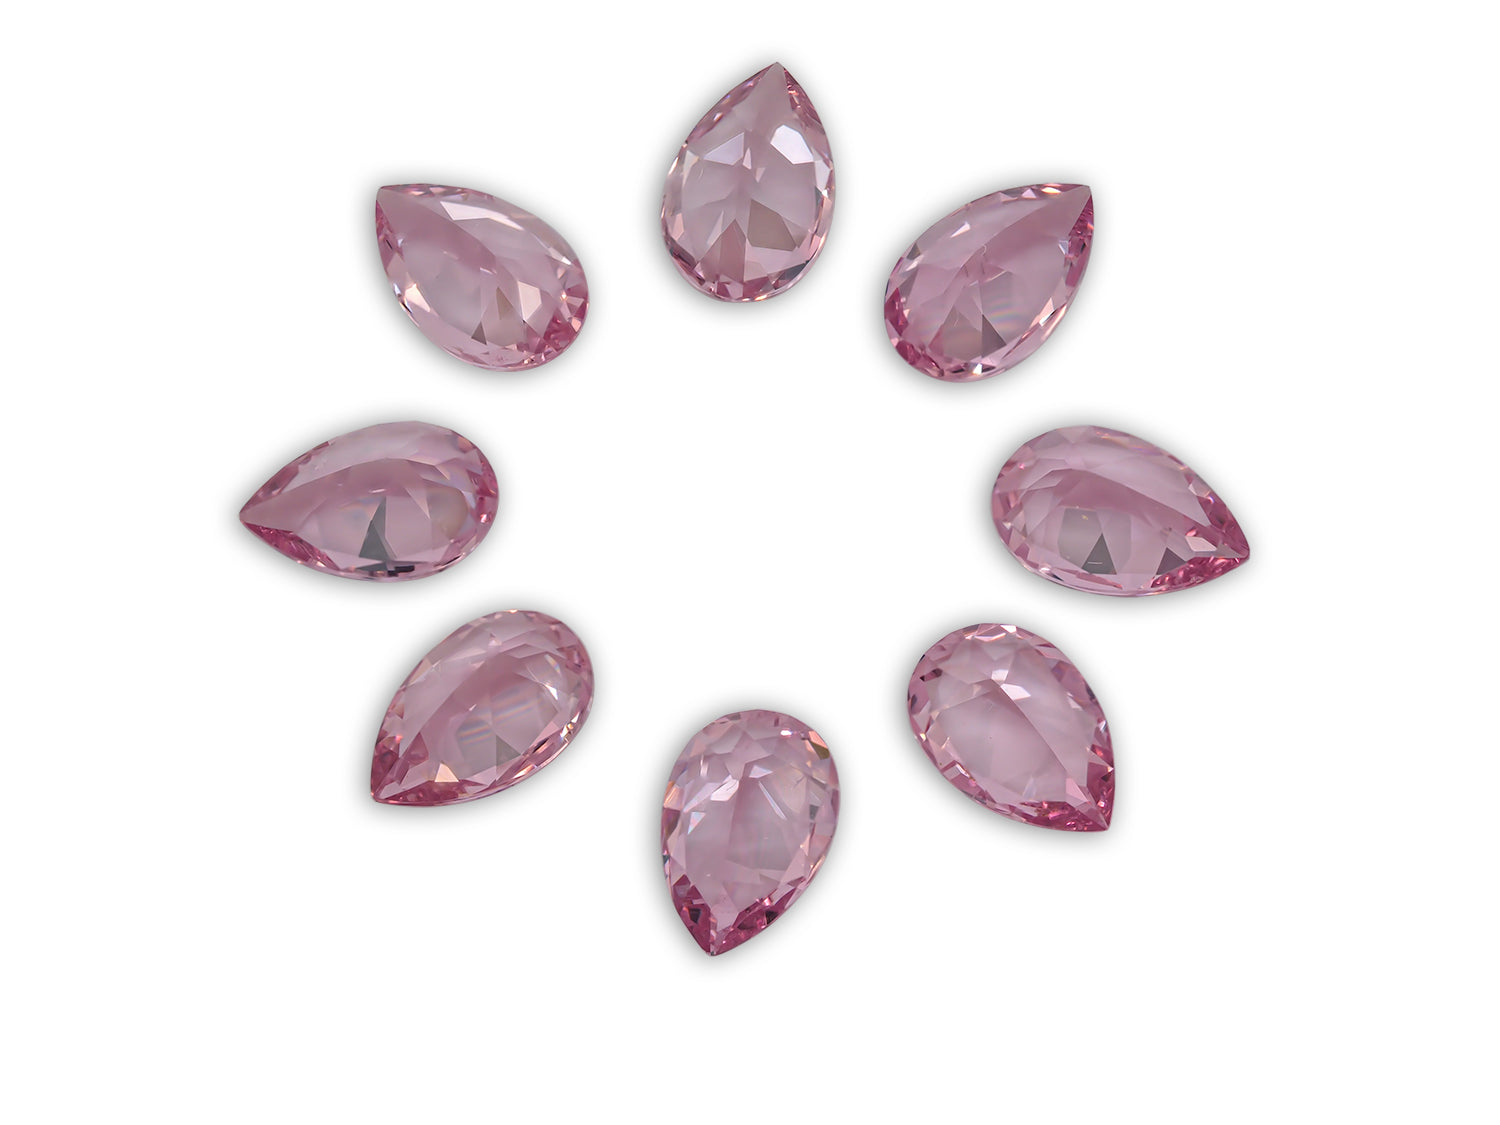 Neon Pink Spinel 2.62 CT / 8